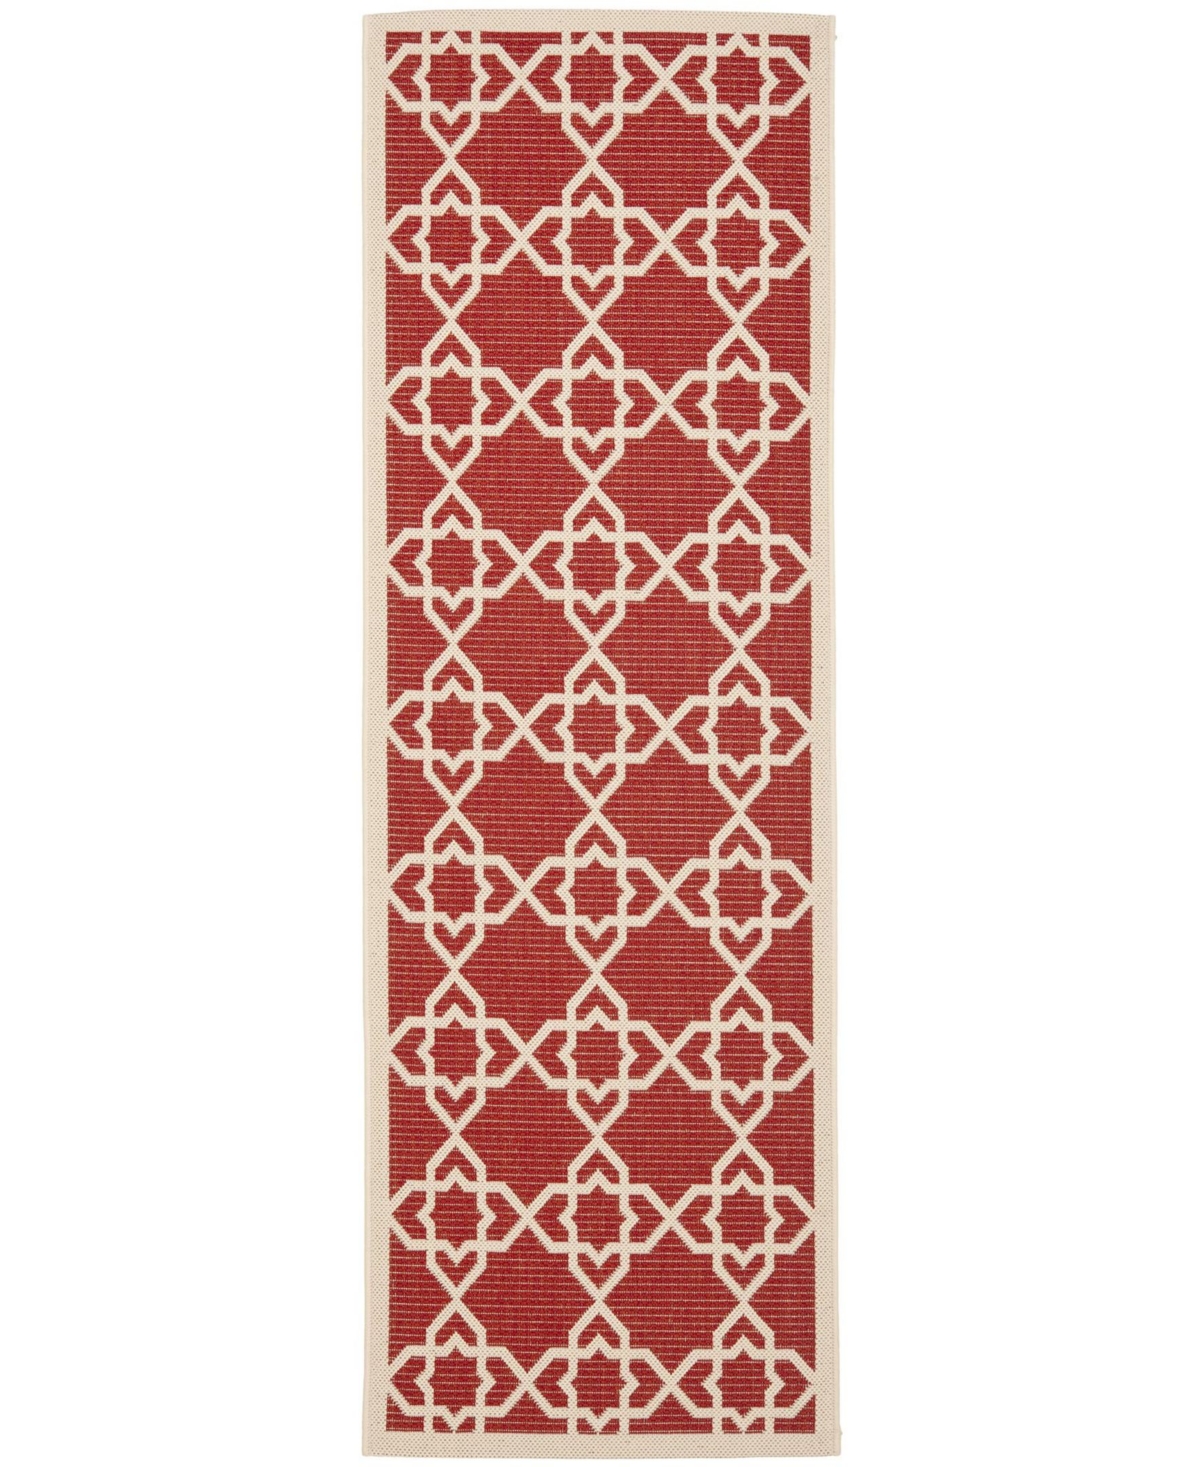 Safavieh Courtyard Cy6032 Red And Beige 2'3" X 12' Runner Outdoor Area Rug